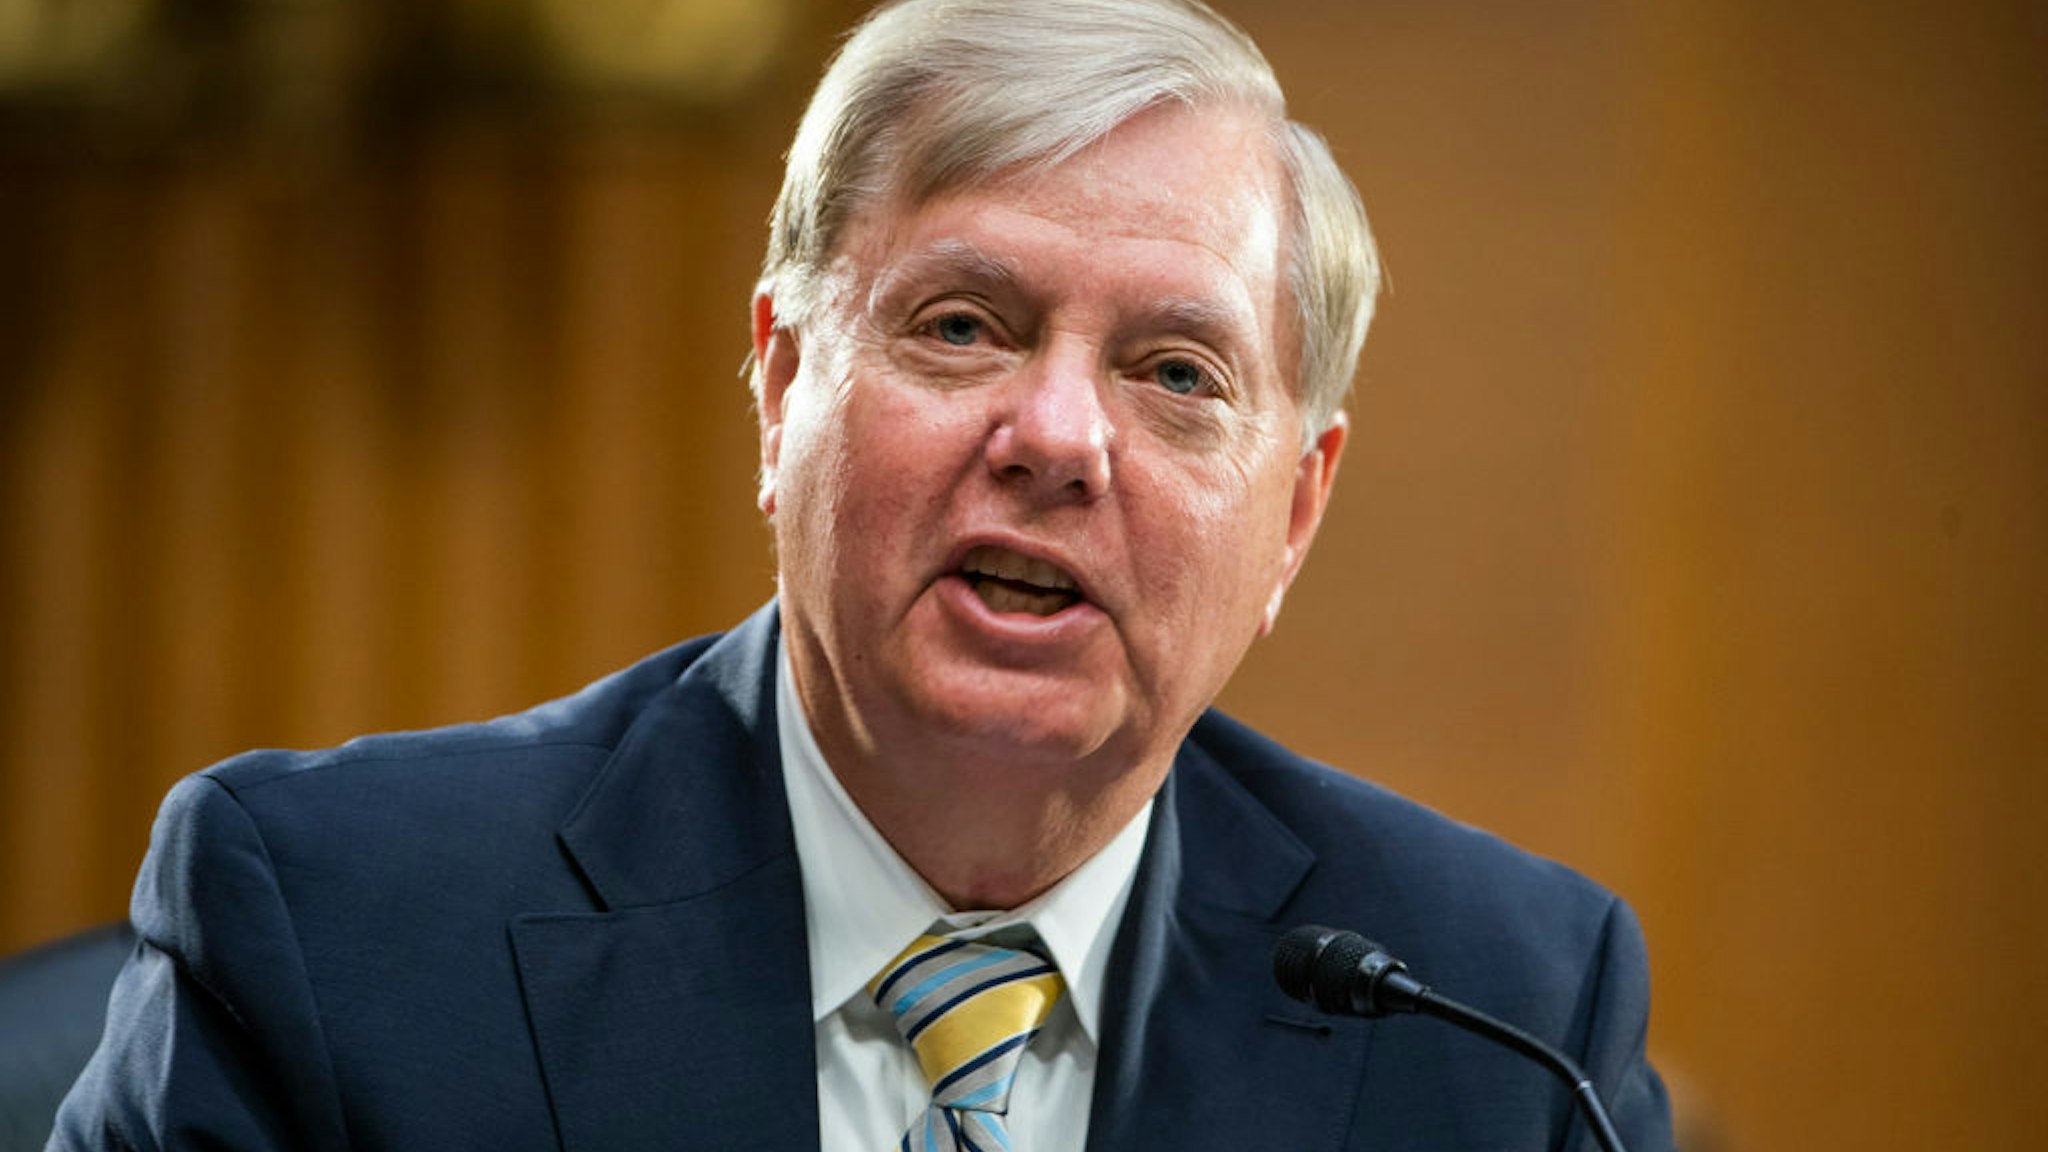 Sen. Lindsey Graham (R-SC) questions U.S. Secretary of State Mike Pompeo during a Senate Foreign Relations committee hearing on the State Department's 2021 budget in the Dirksen Senate Office Building on July 30, 2020 in Washington, DC.